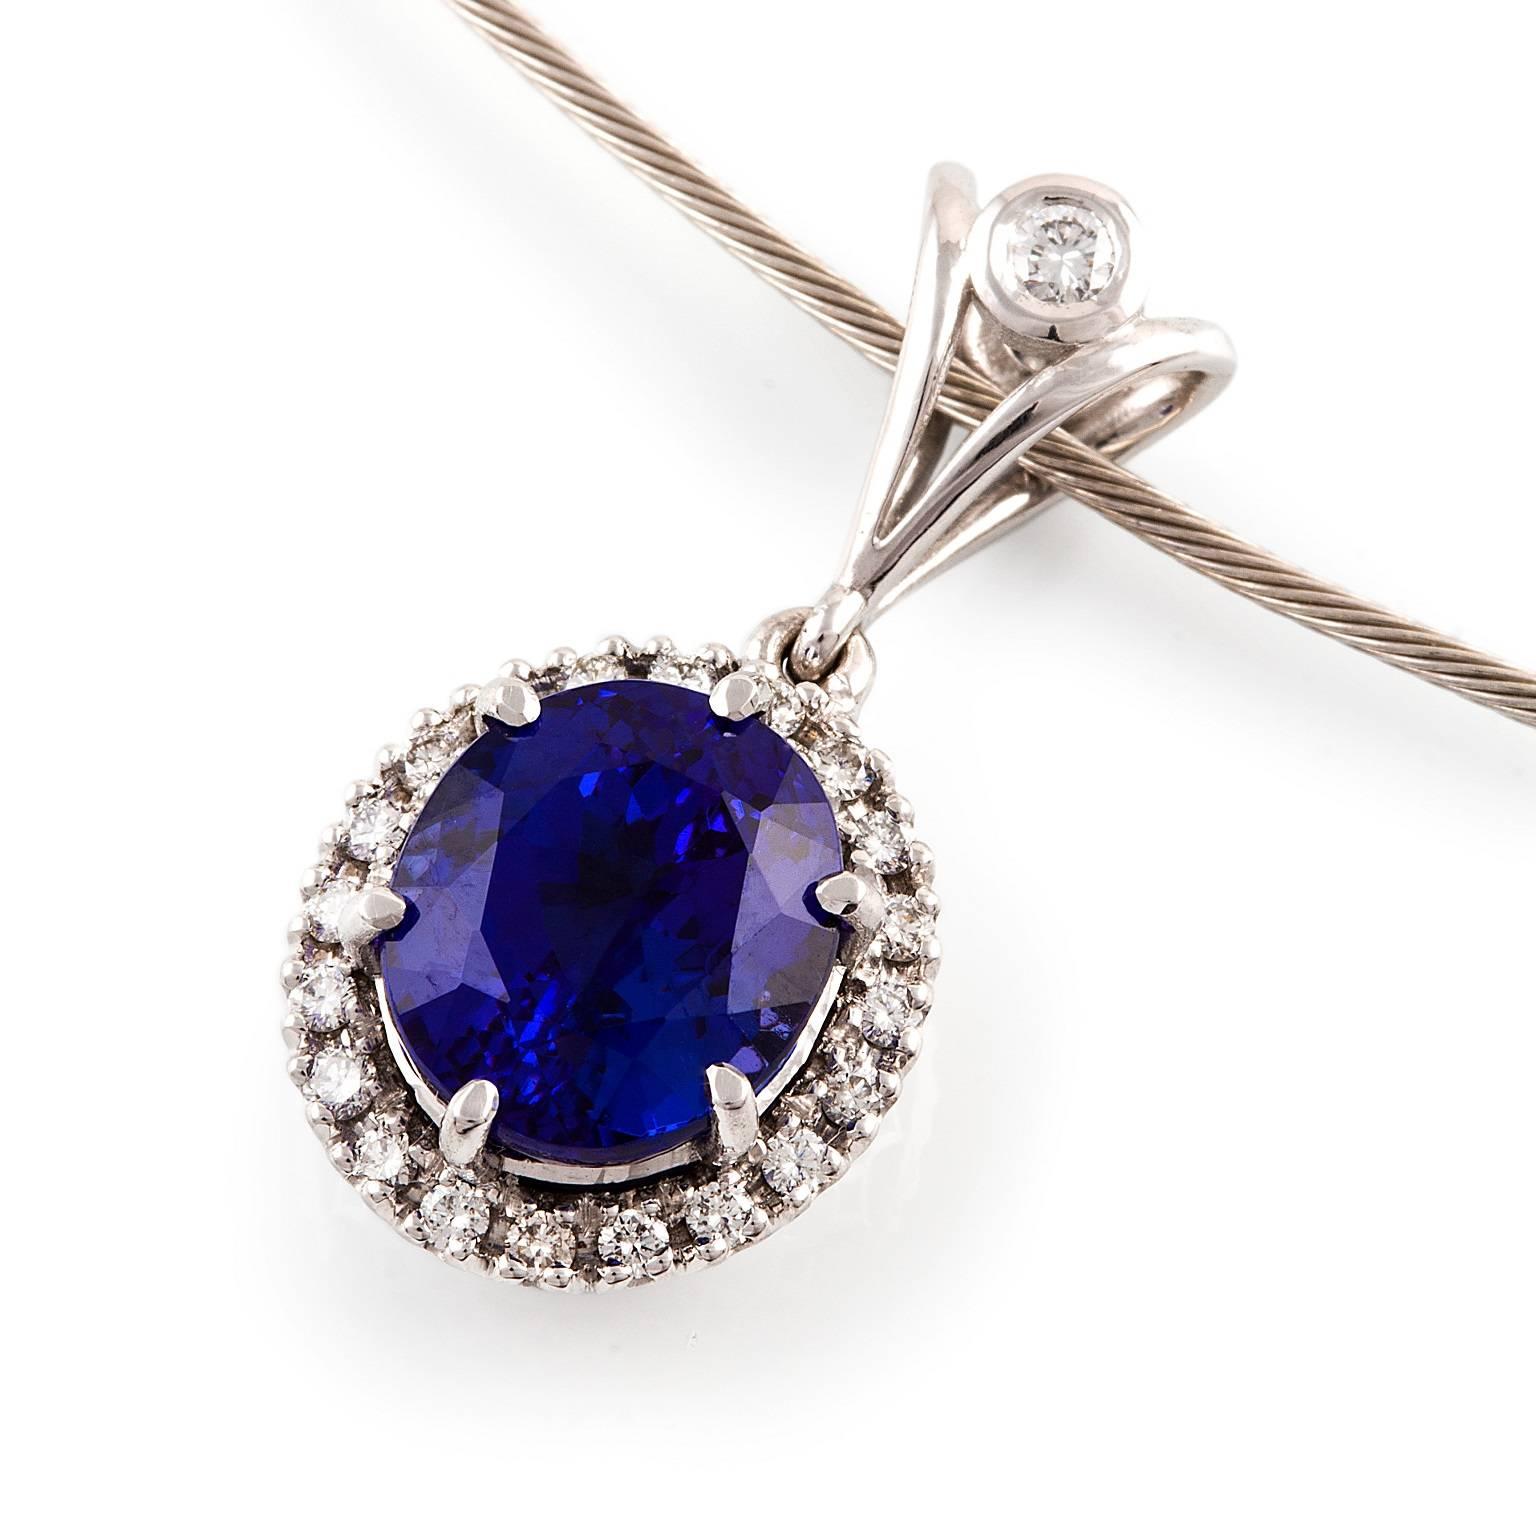 6.30 Carat Tanzanite and Diamond Necklace in 18 Carat White Gold BY Kian Design For Sale 1